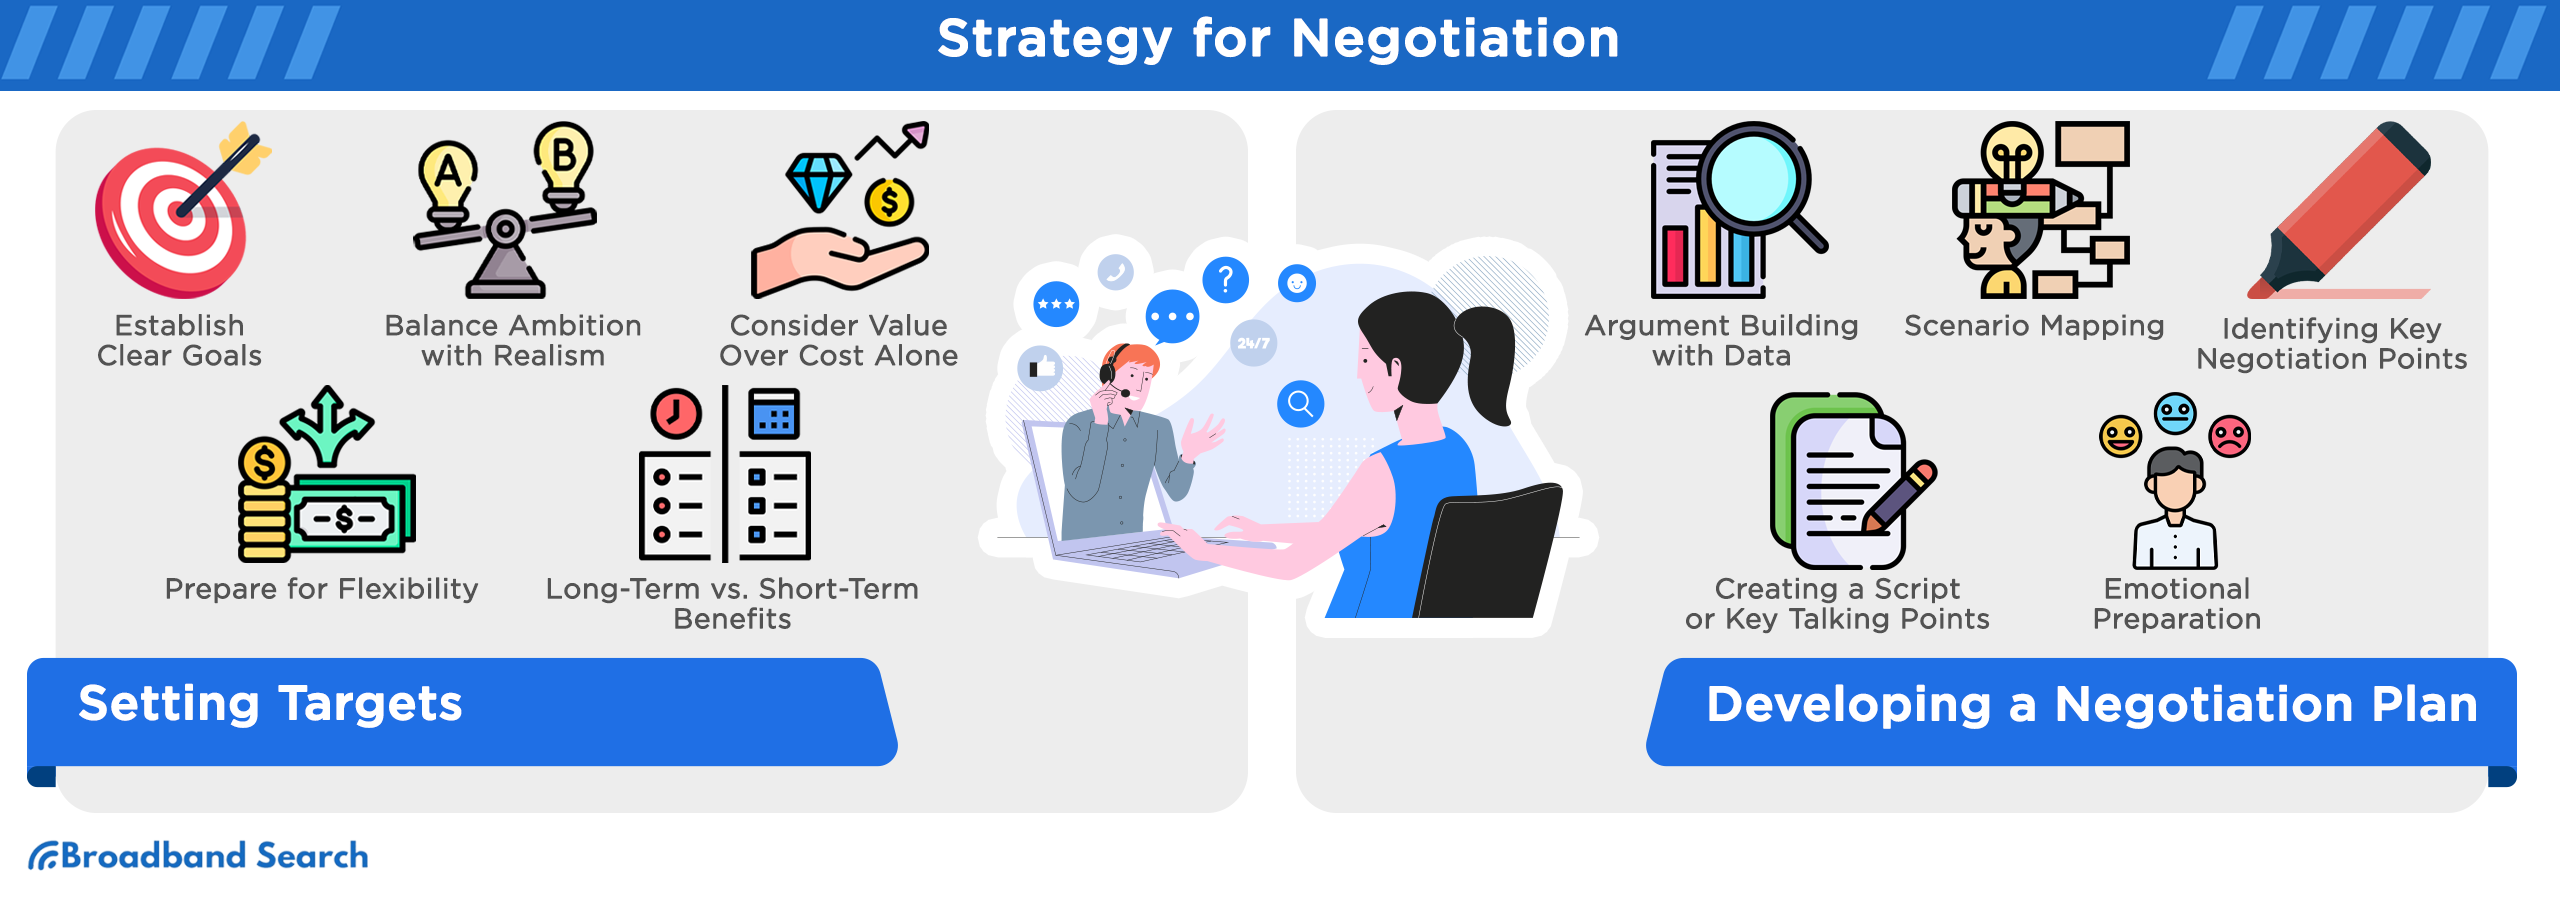 Strategies for negotiation with your provider